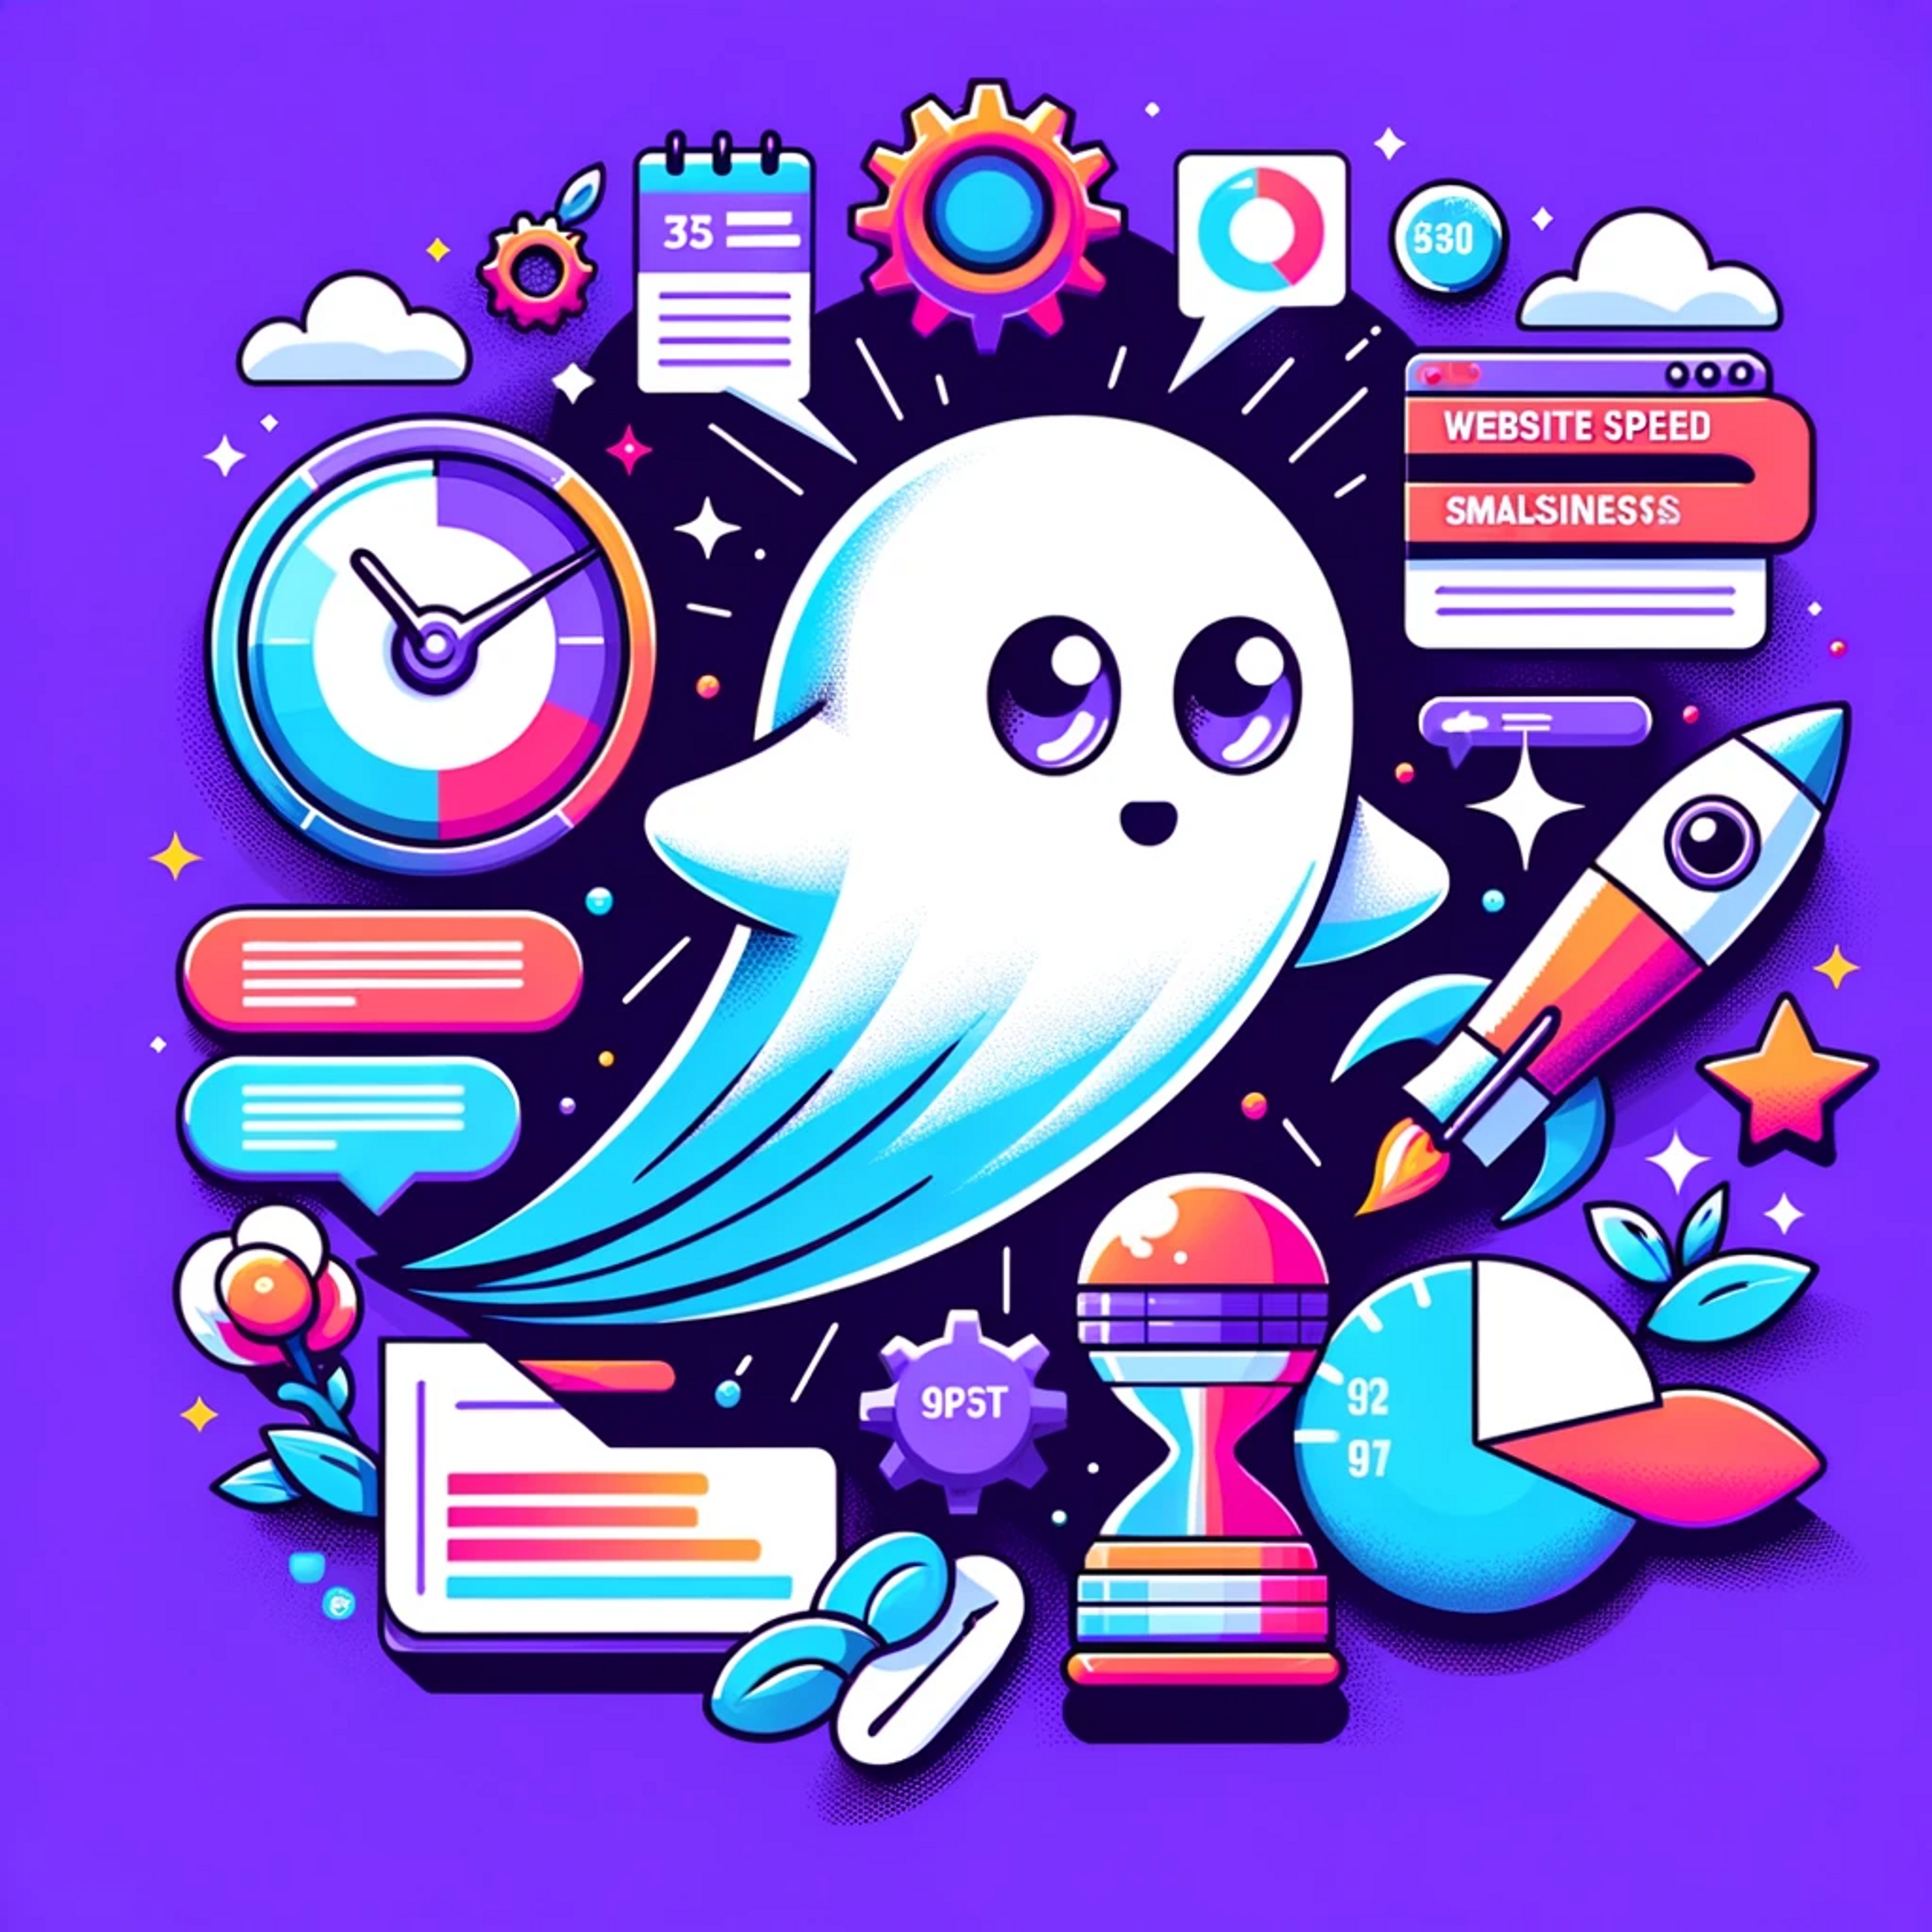 Blog thumbnail with a playful ghost cartoon character showing off why SME's need a fast site